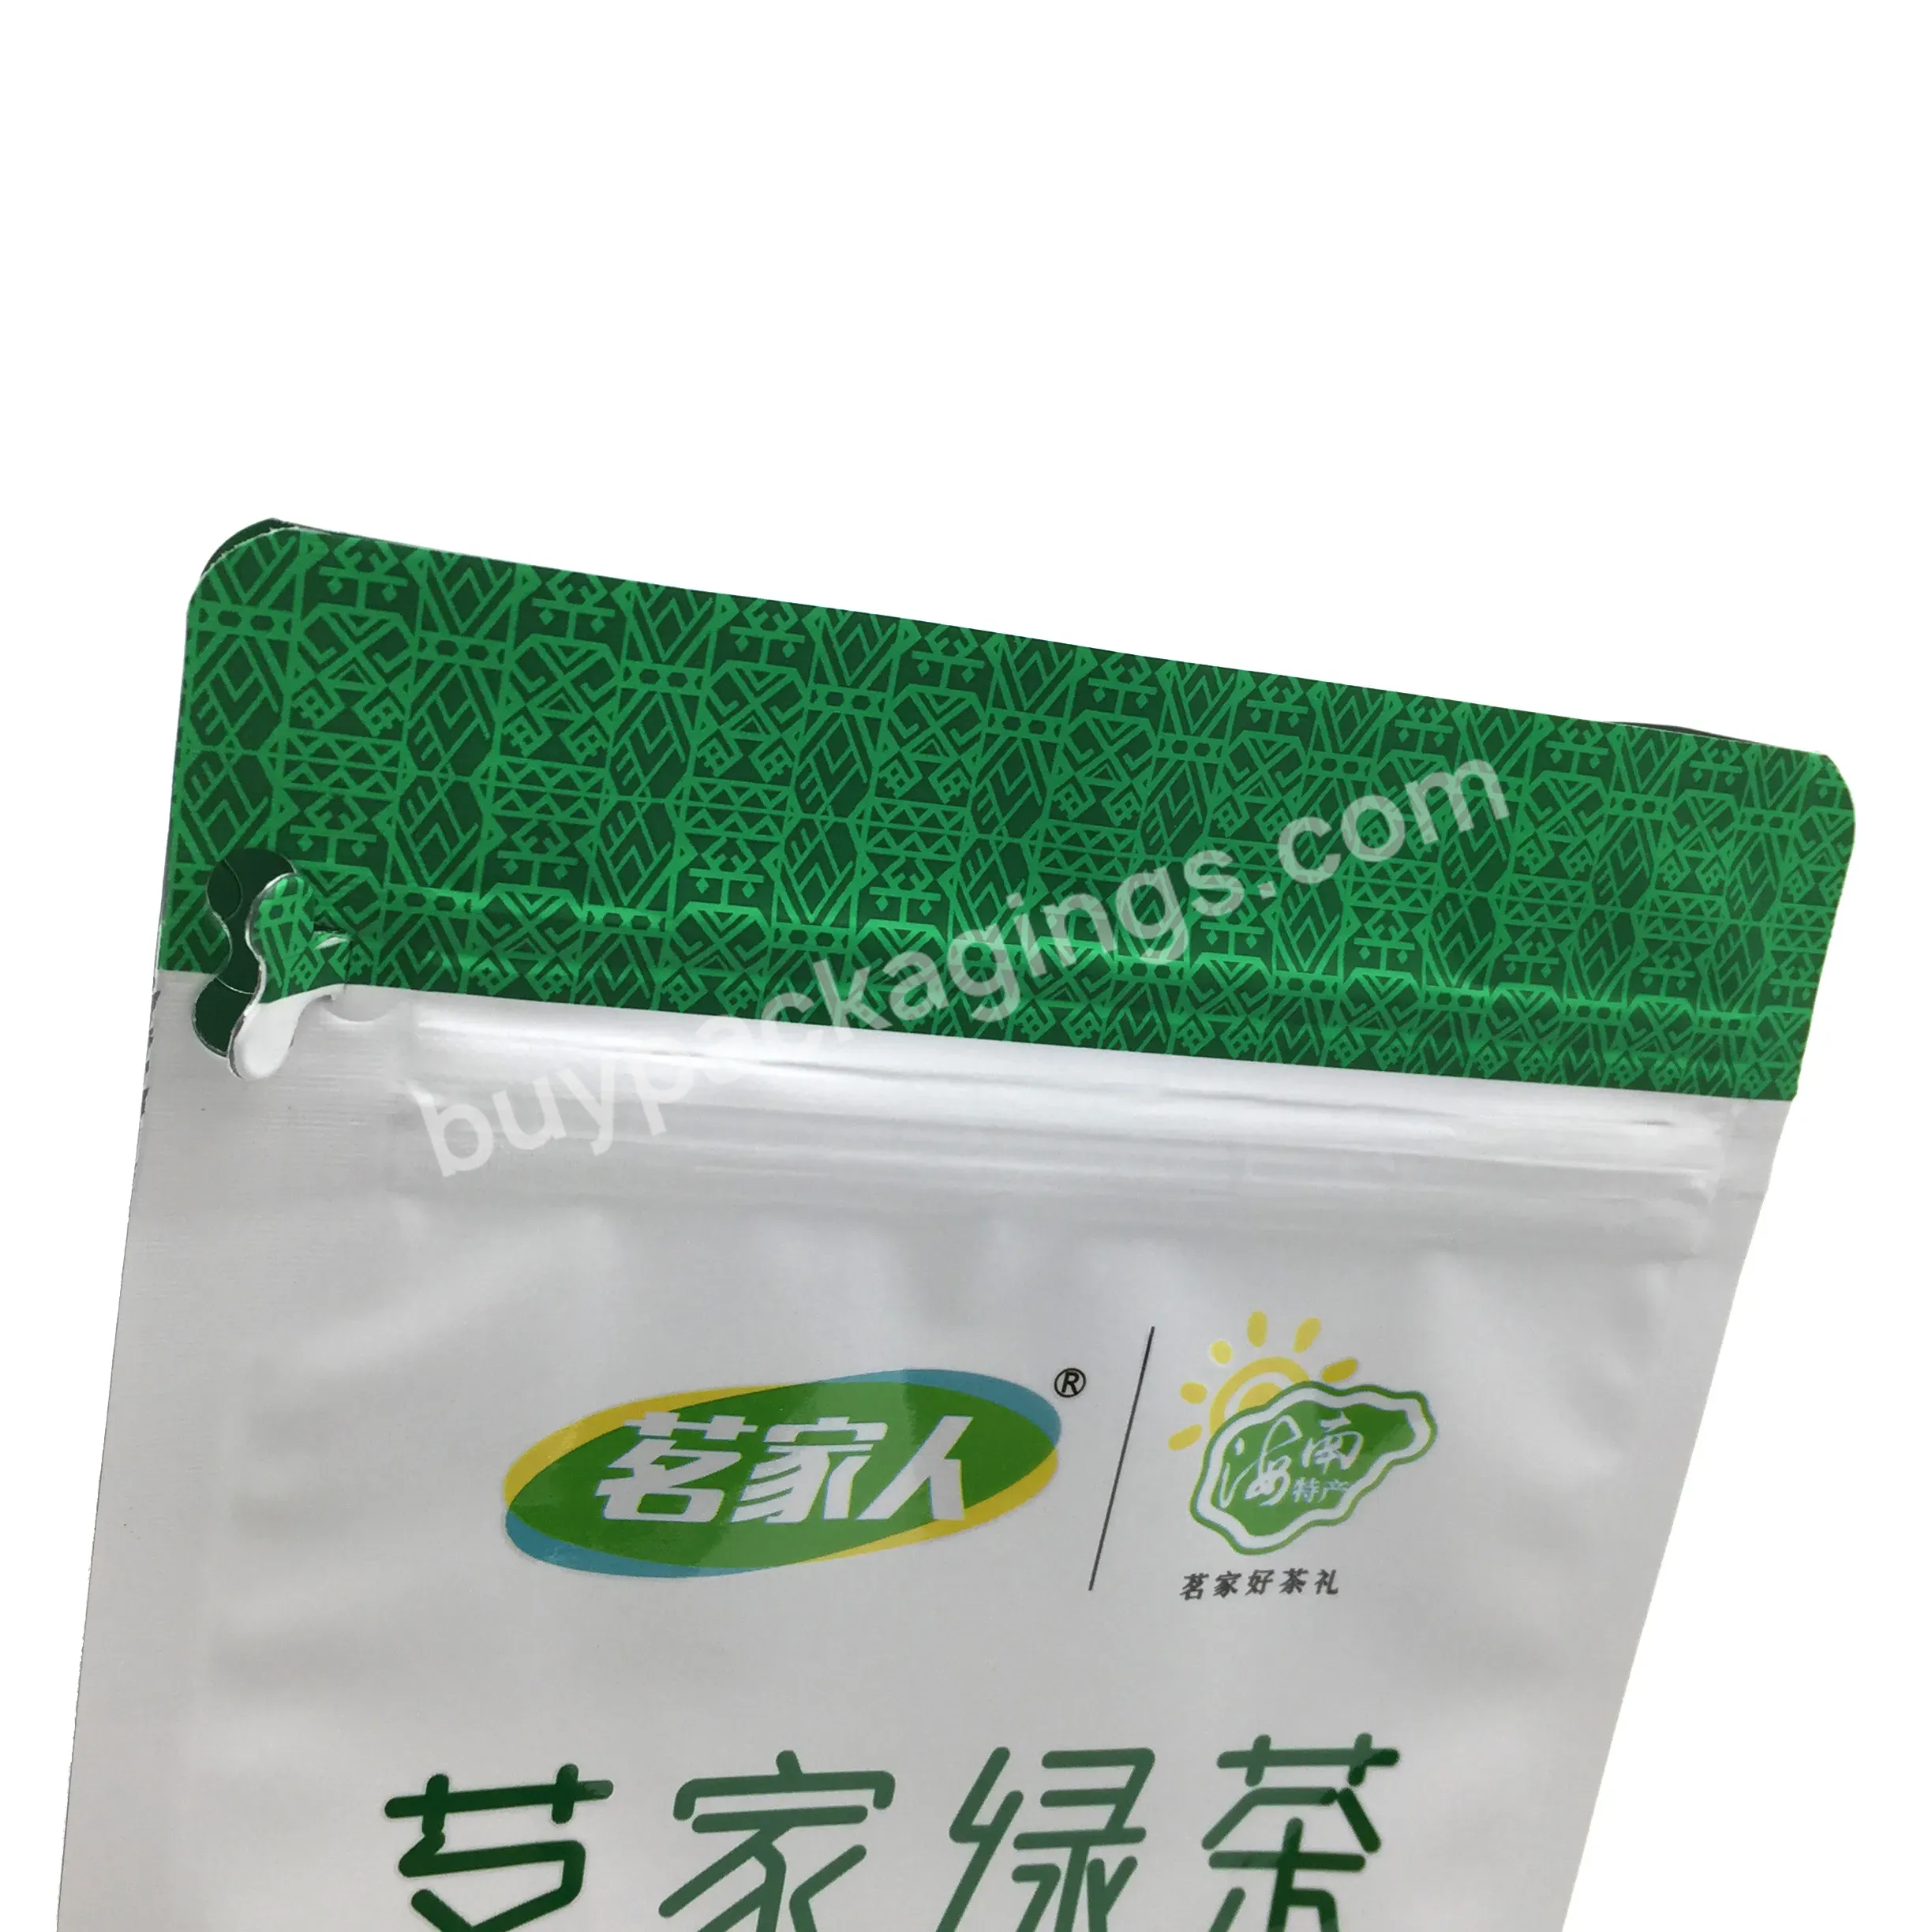 Customized Printed Zip Lock Stand Up Foil Bags Flat Bottom Pouch Zipper Snack Tea Protein Powder Bag - Buy Flat Bottom Pouch Zipper Bag,Zipper Snack Tea Protein Powder Bag,Flat Bottom Pouch Zipper Bag.